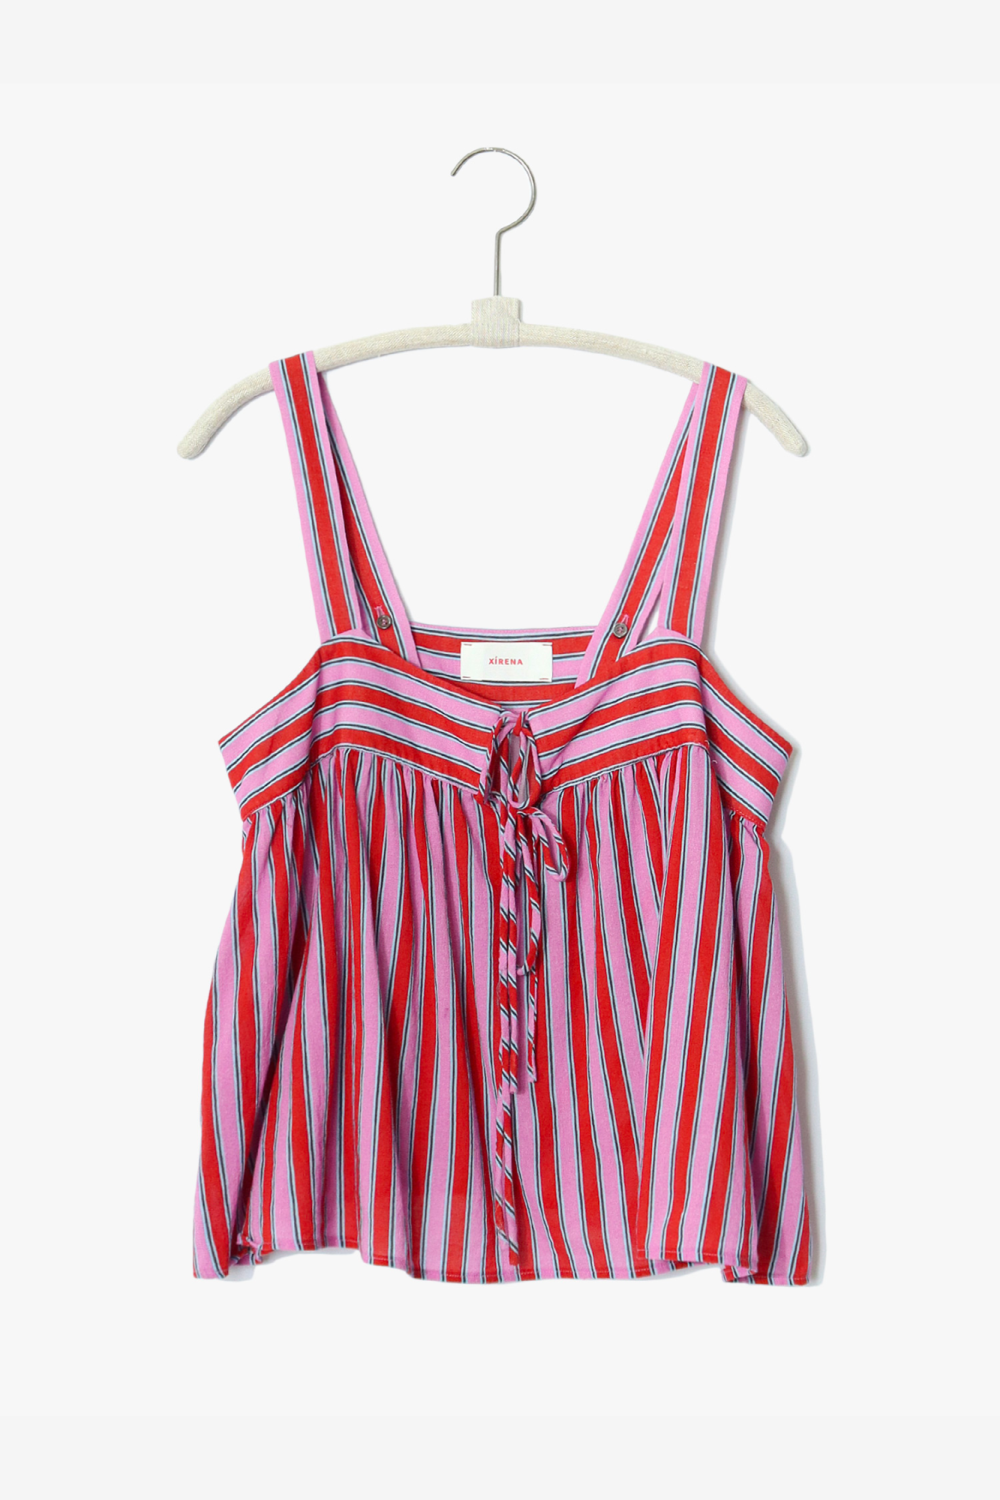 The Kyra Top from Xirena is a colorful gauze stripe. Kyra is a subtlely cropped tank top with a square neckline,